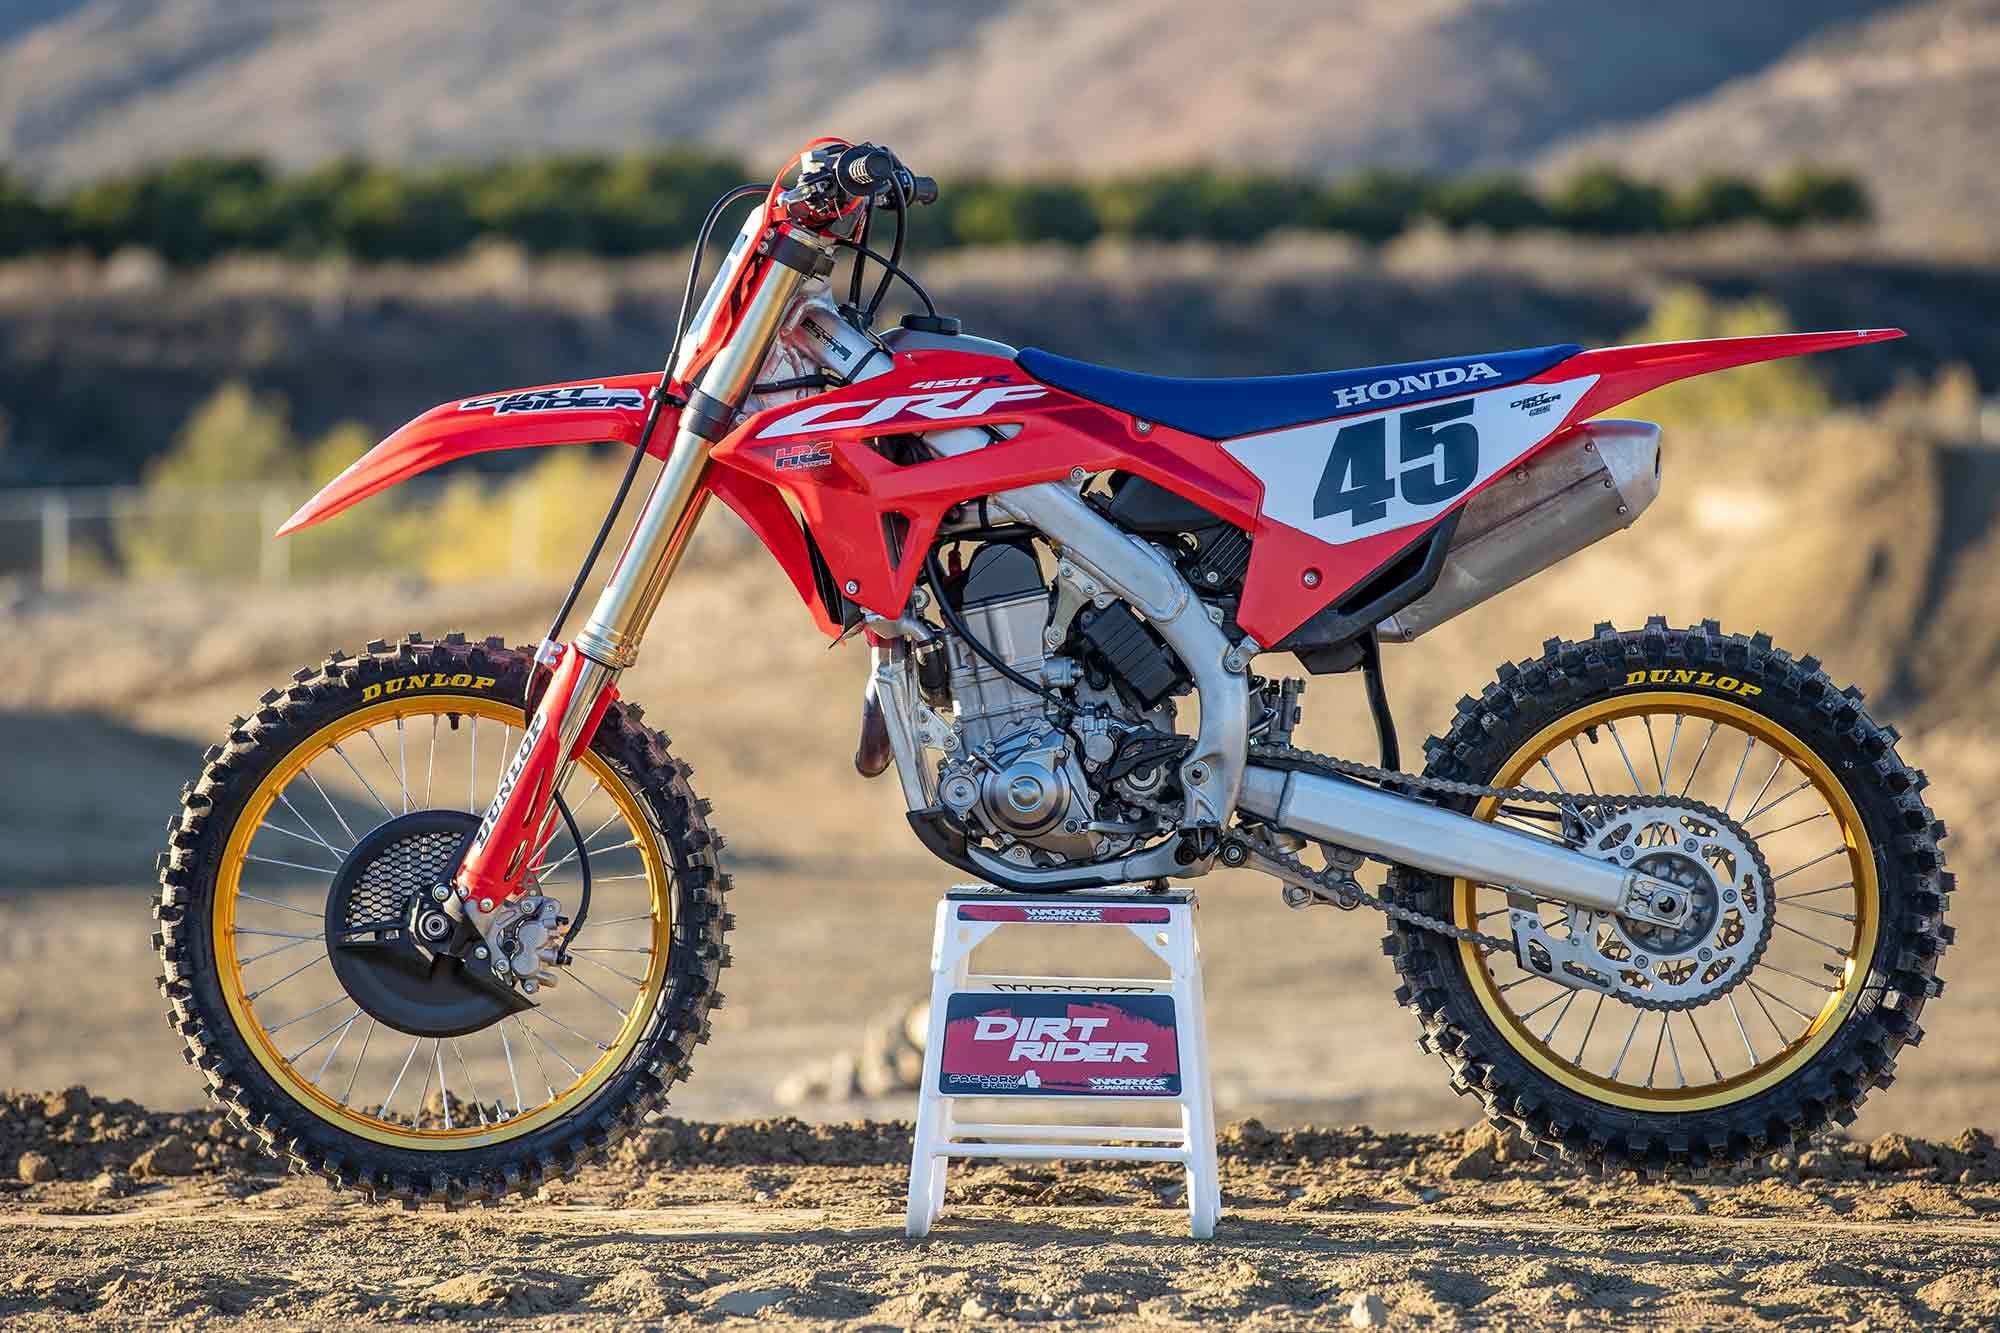 The CRF450R is heaviest of those gathered here at 245 pounds wet on <i>Dirt Rider</i>’s automotive scales, but not by much over the other two offerings from Japan.